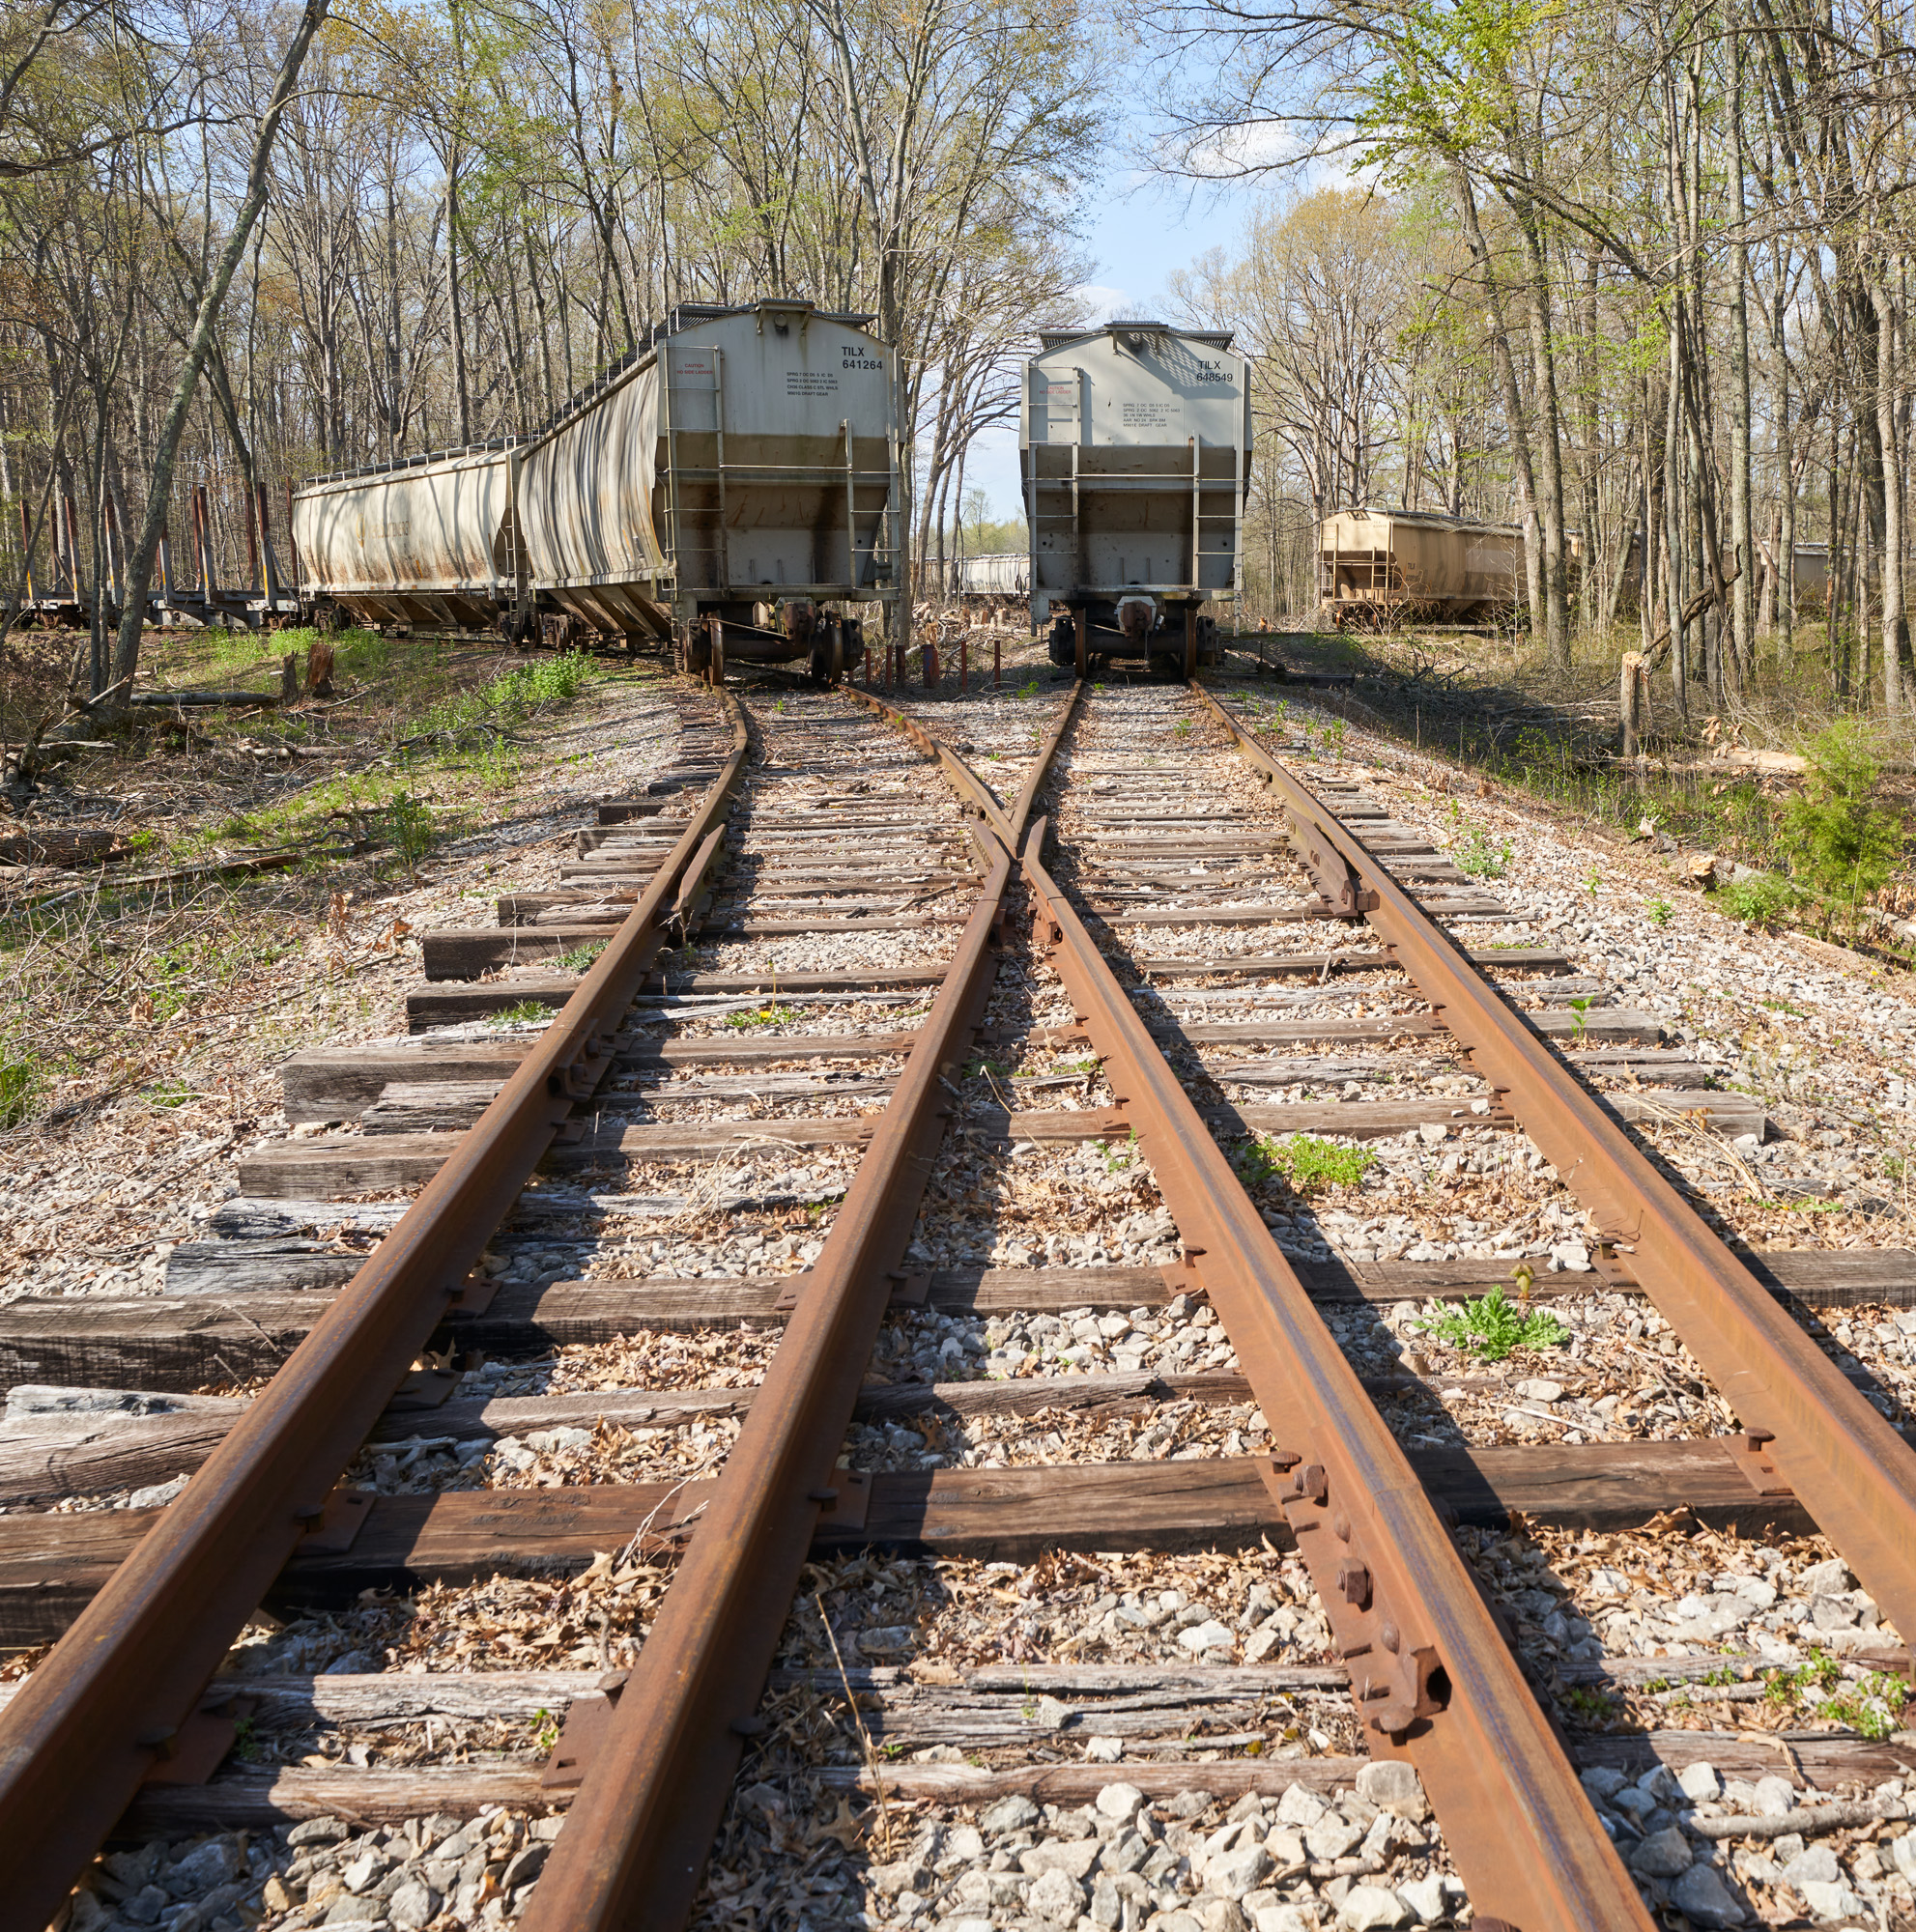 There are railroad tracks and train cars everywhere. I'd love to explore these more.